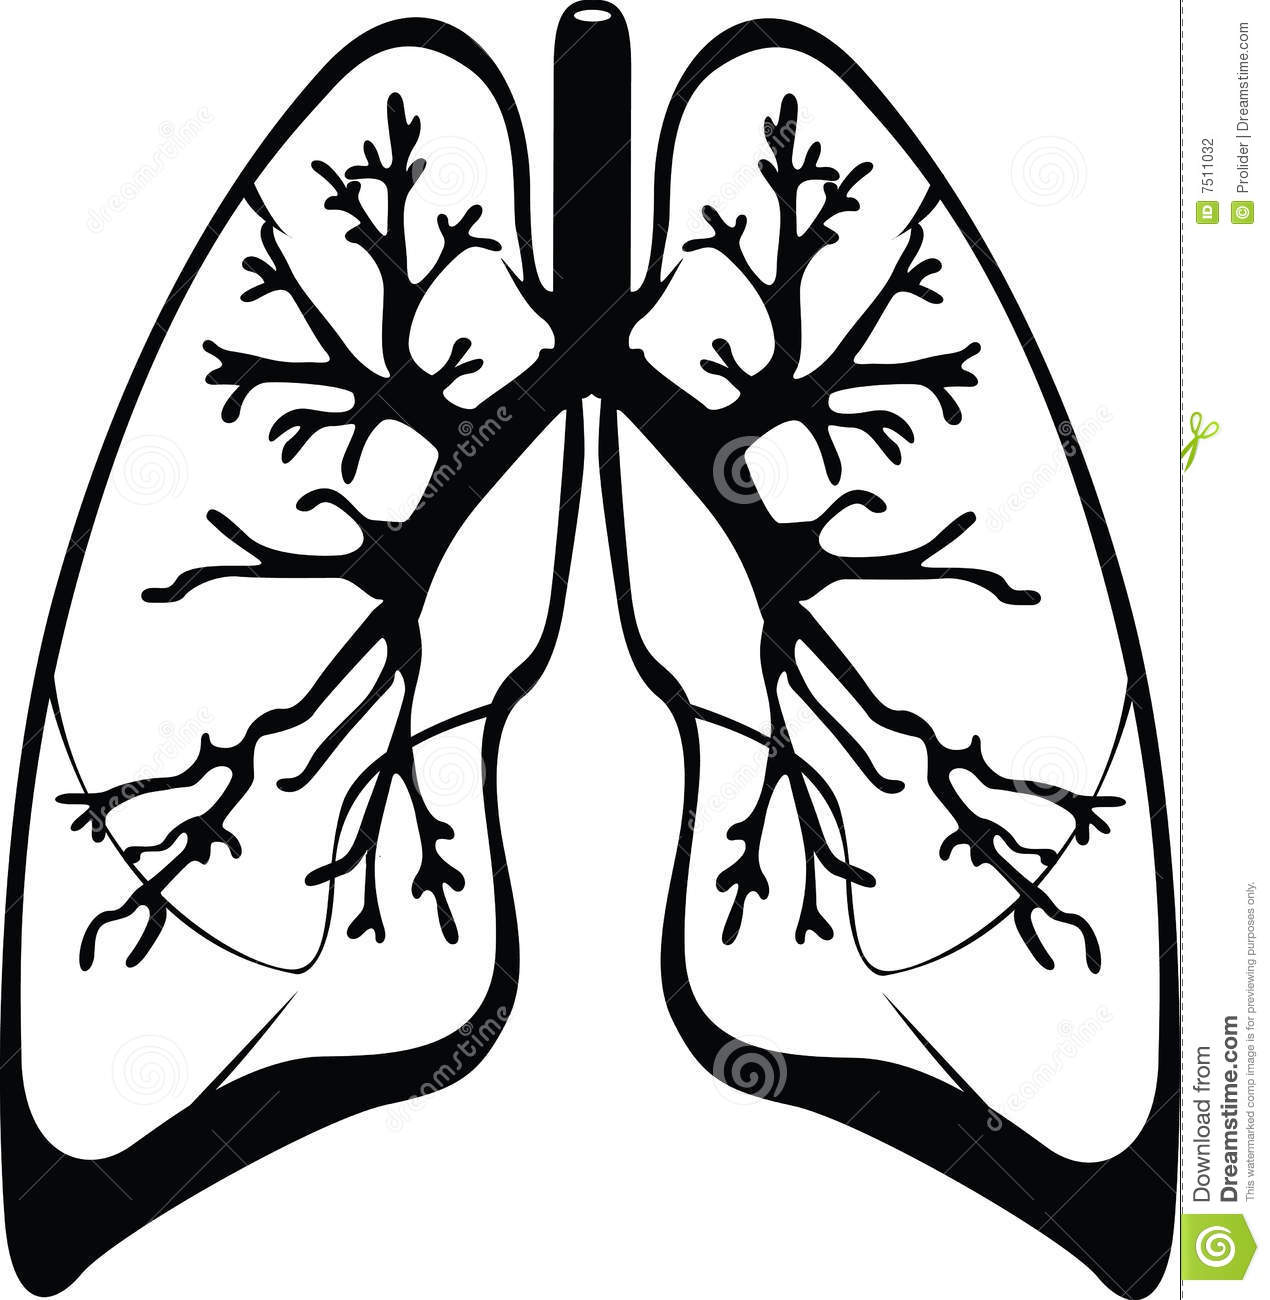 lungs clipart black and white - Clipground